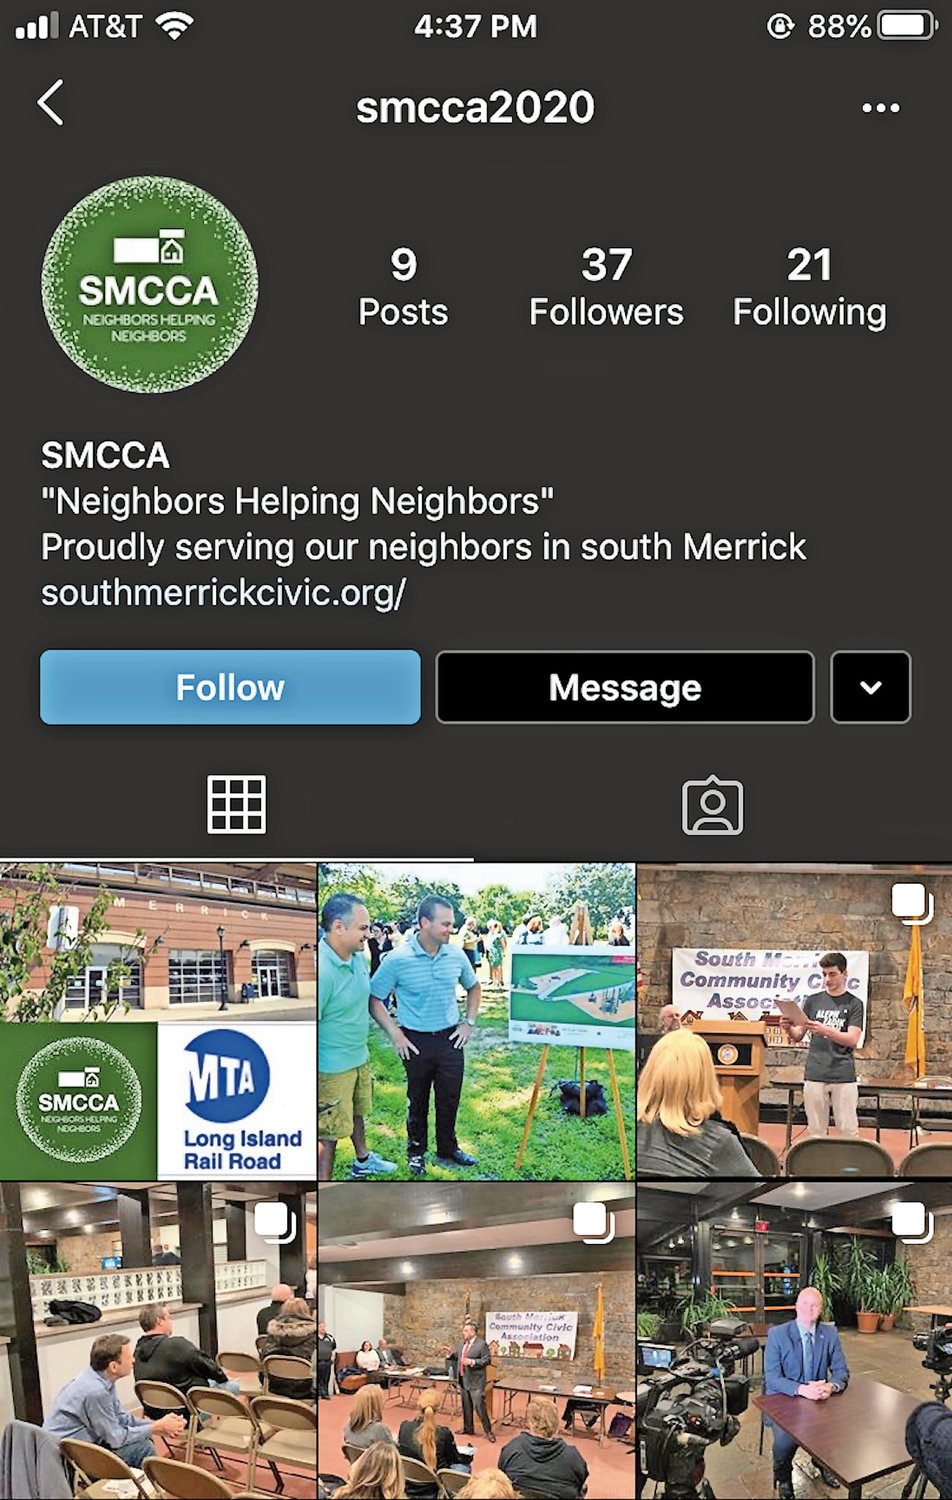 A screenshot from SMCCA’s Instagram page, which is up and running.